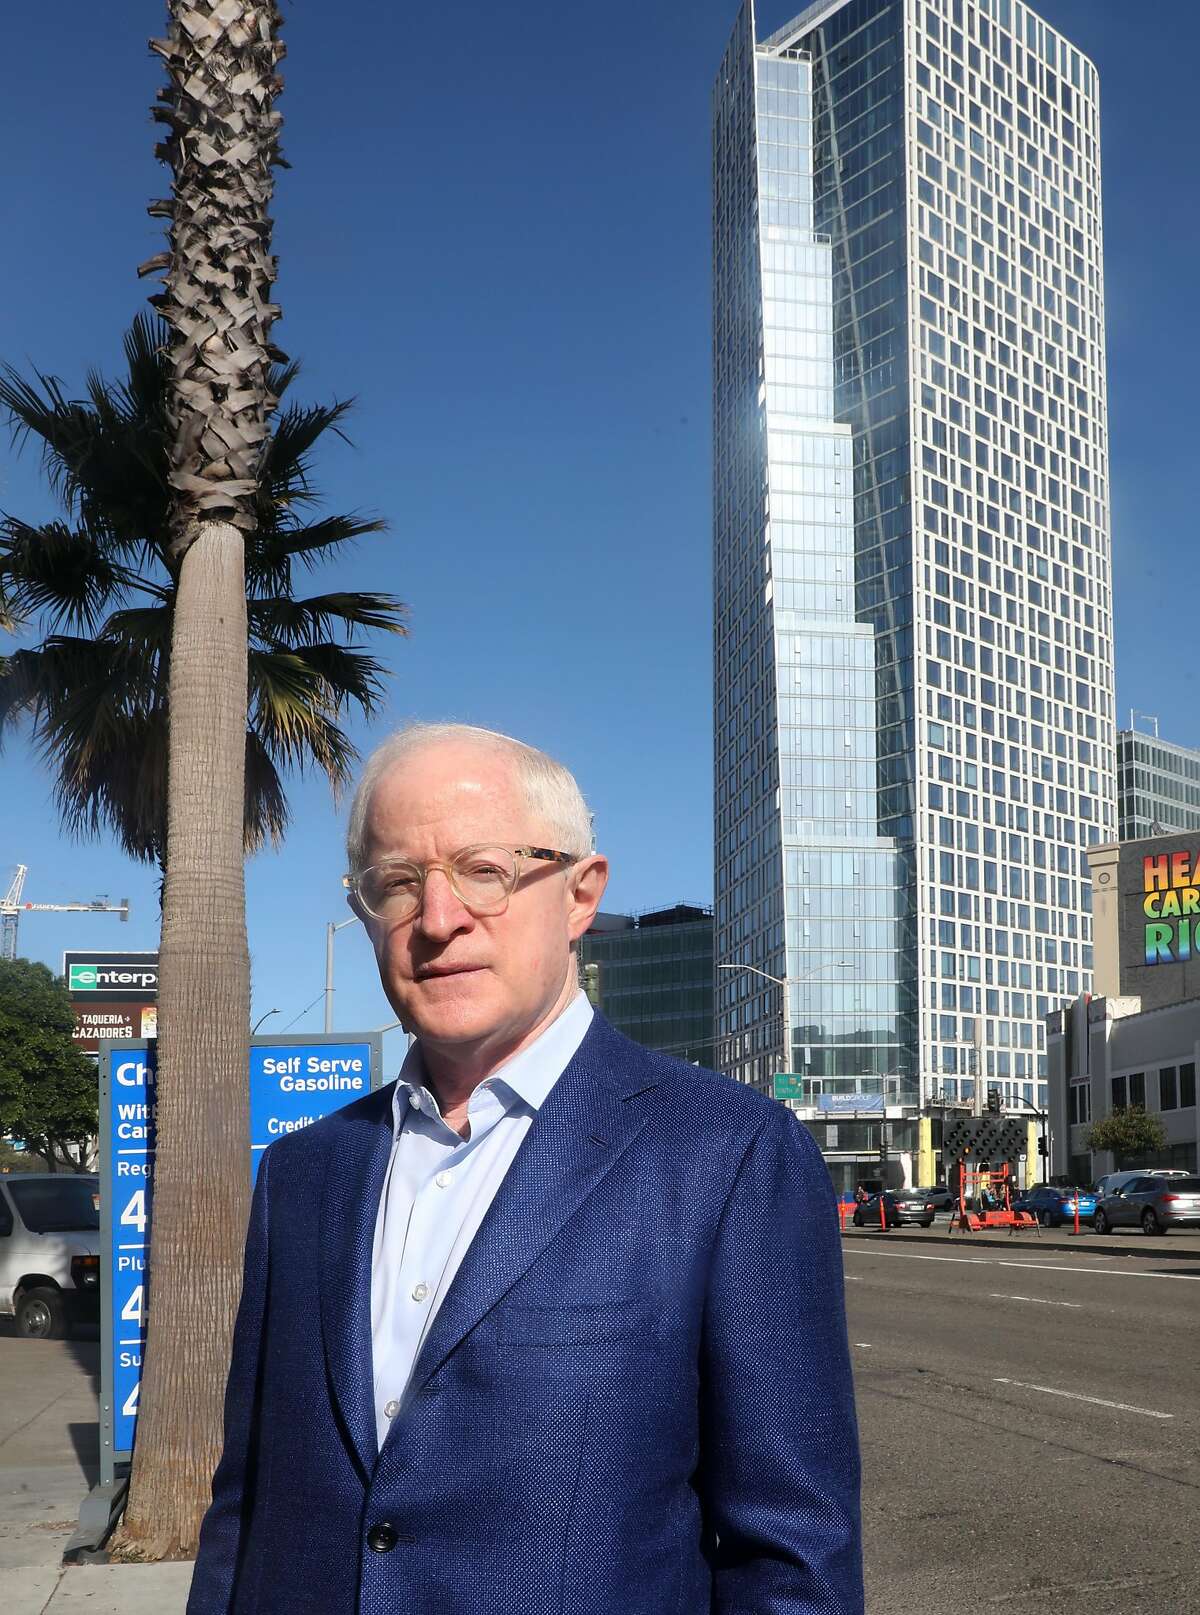 Chairman and chief executive officer Bill Witte of Related California shows his newest project at 1500 Mission St. (tower behind him) on Tuesday, Nov. 19, 2019, in San Francisco, Calif.